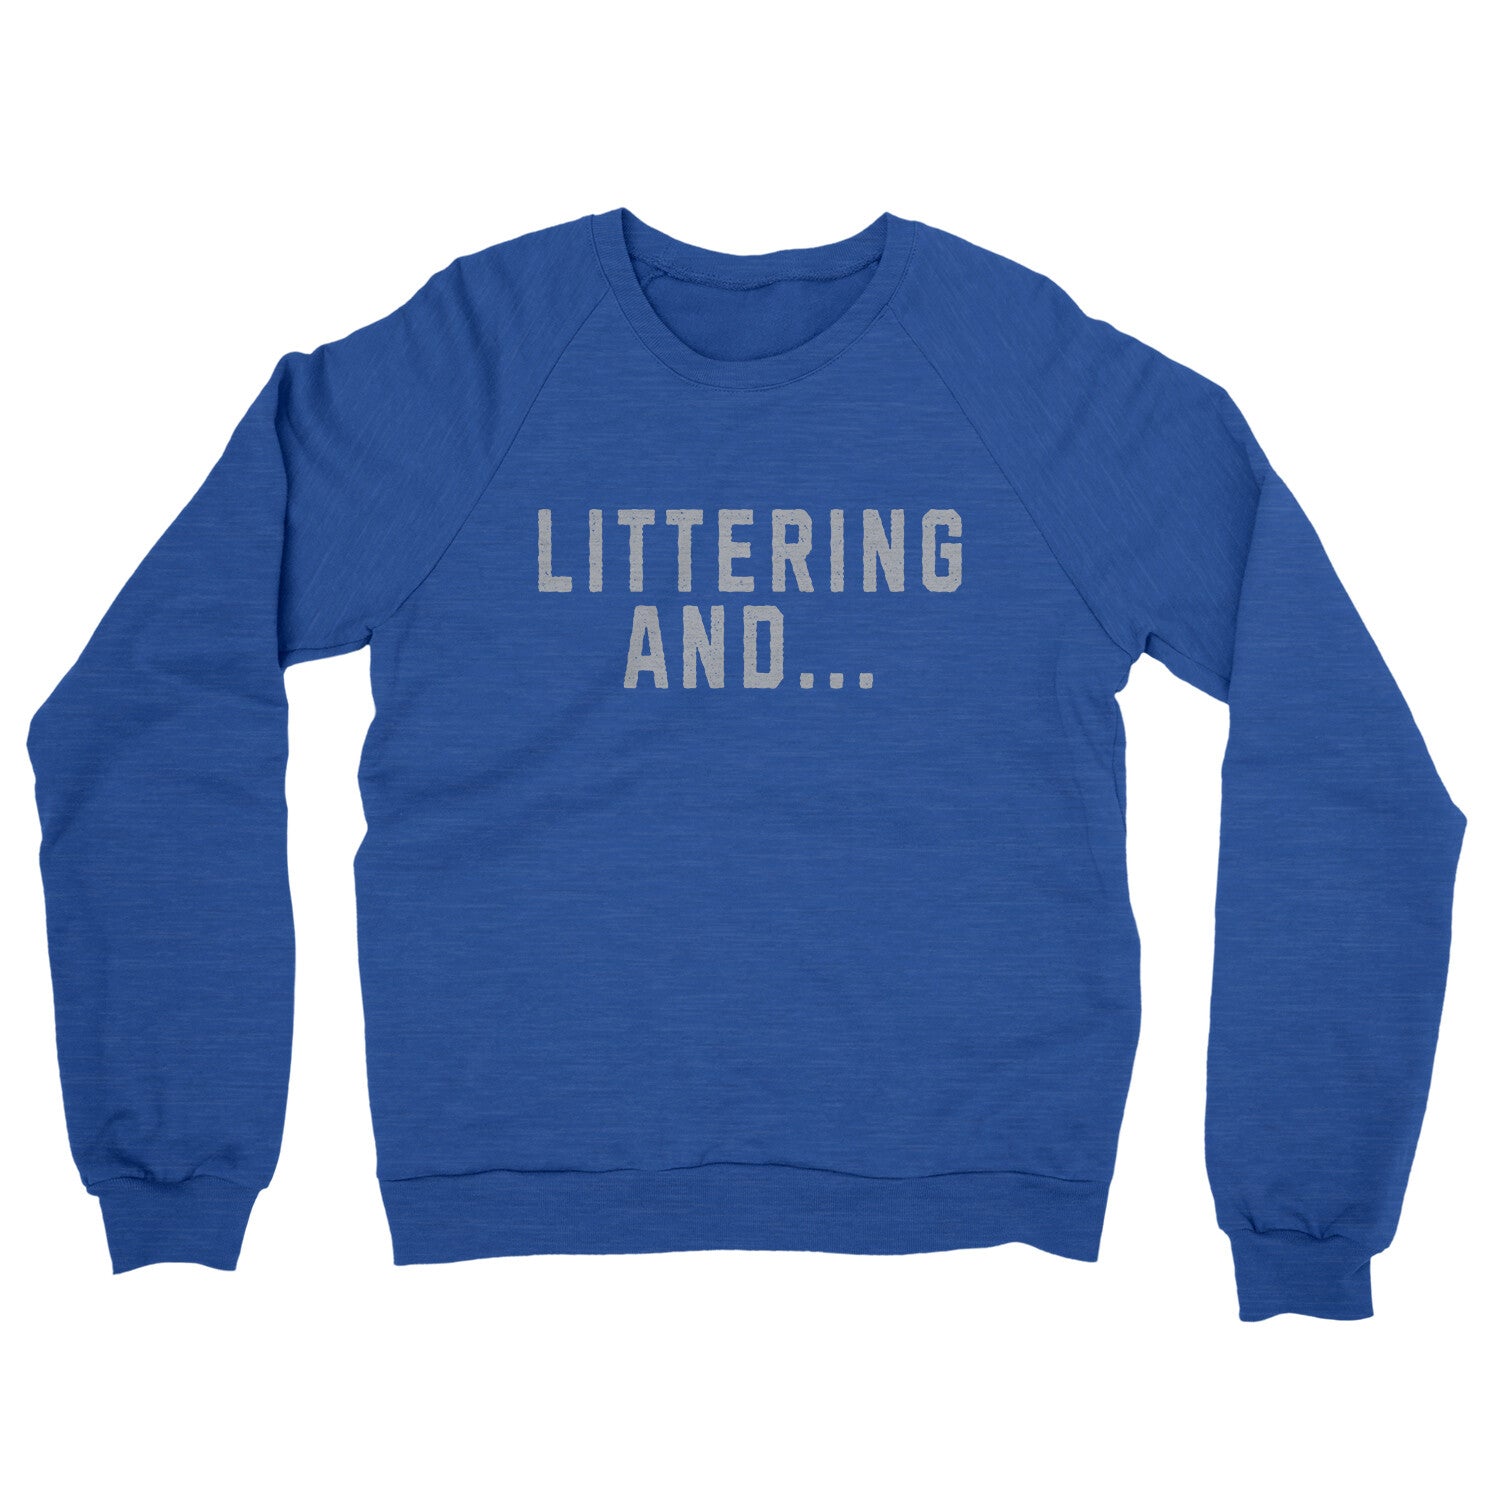 Littering And in Heather Royal Color